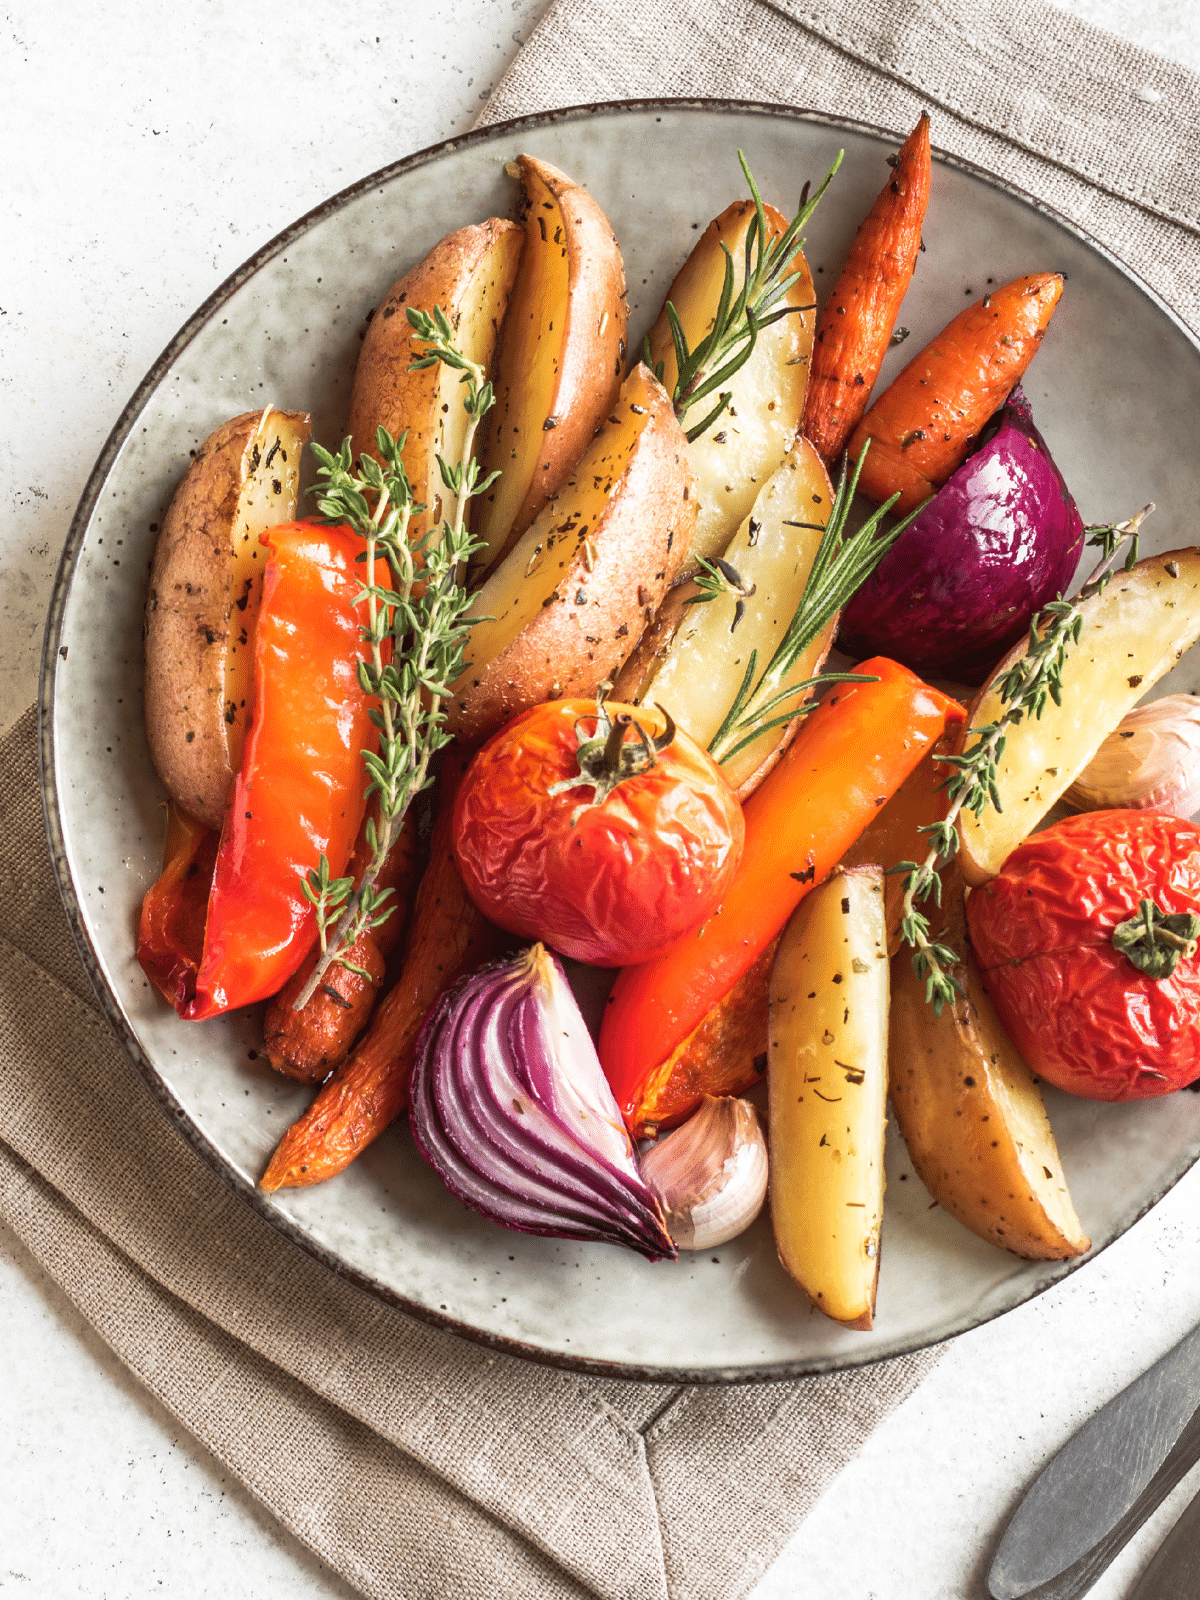 Roasted seasonal vegetables on a serving plate with fresh thyme and rosemary.